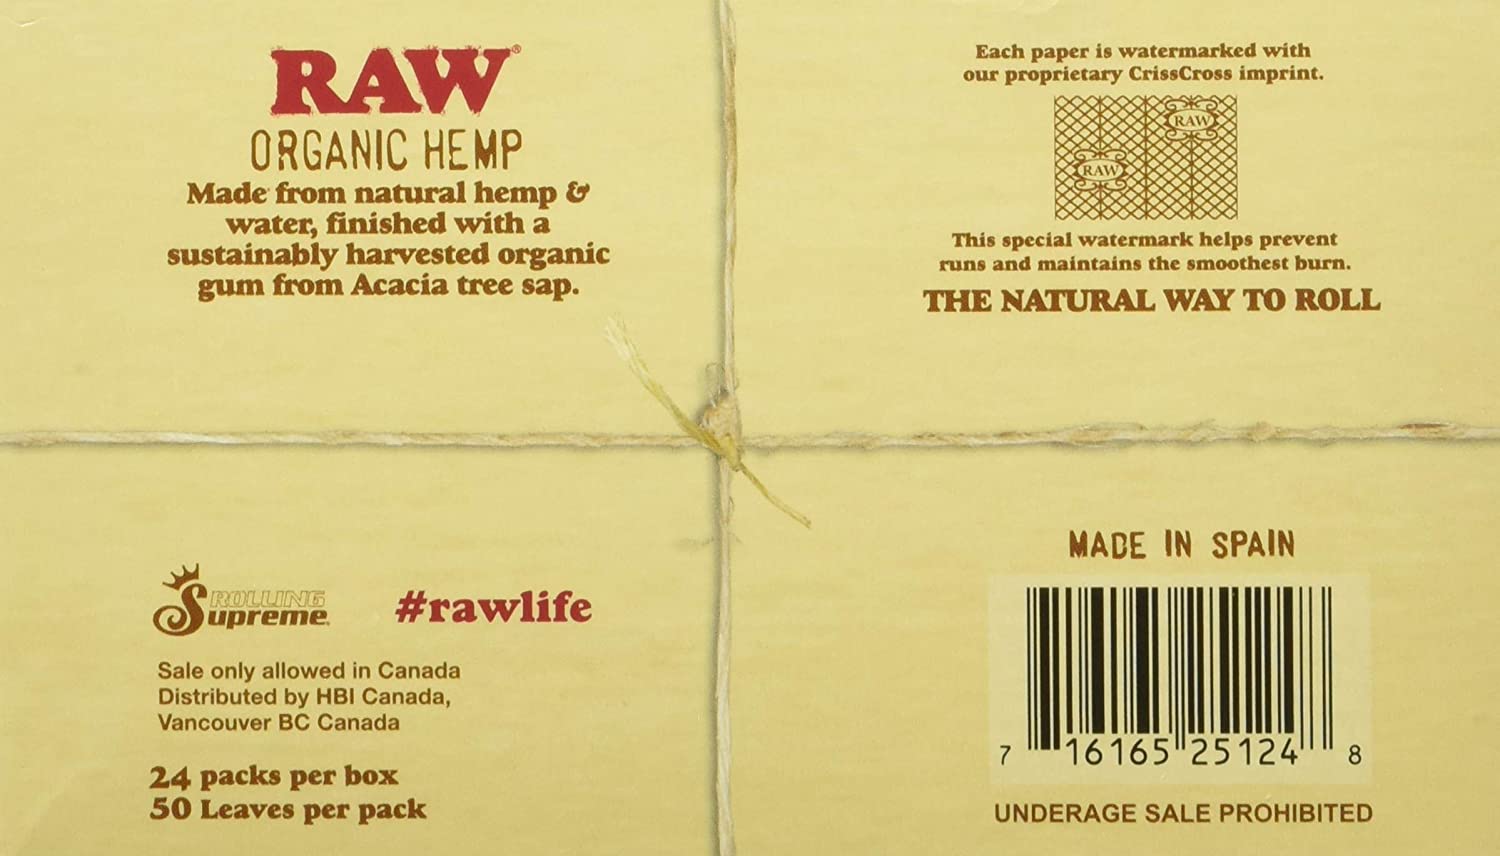 Raw Classic 1.25 1 1/4 Size Rolling Papers Full - Box of 24 Pack - Smoker's World of Hollywood